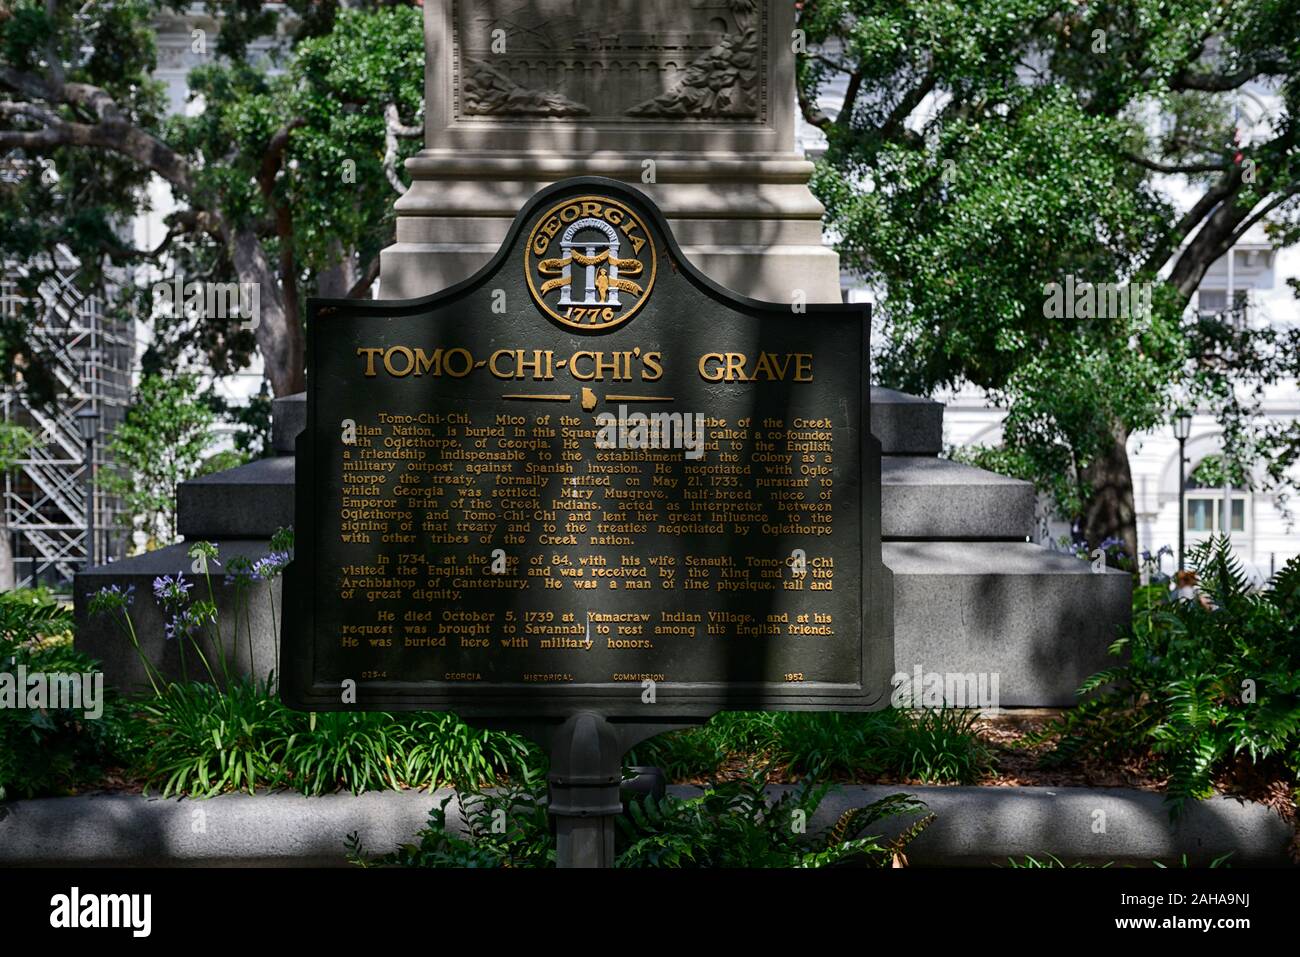 Tomo-Chi-Chi,Mico of the Yamacraw Indians,grave,gravesite,memorial,marker,historical marker,co-founder of georgia,Savannah,Georgia,RM USA Stock Photo